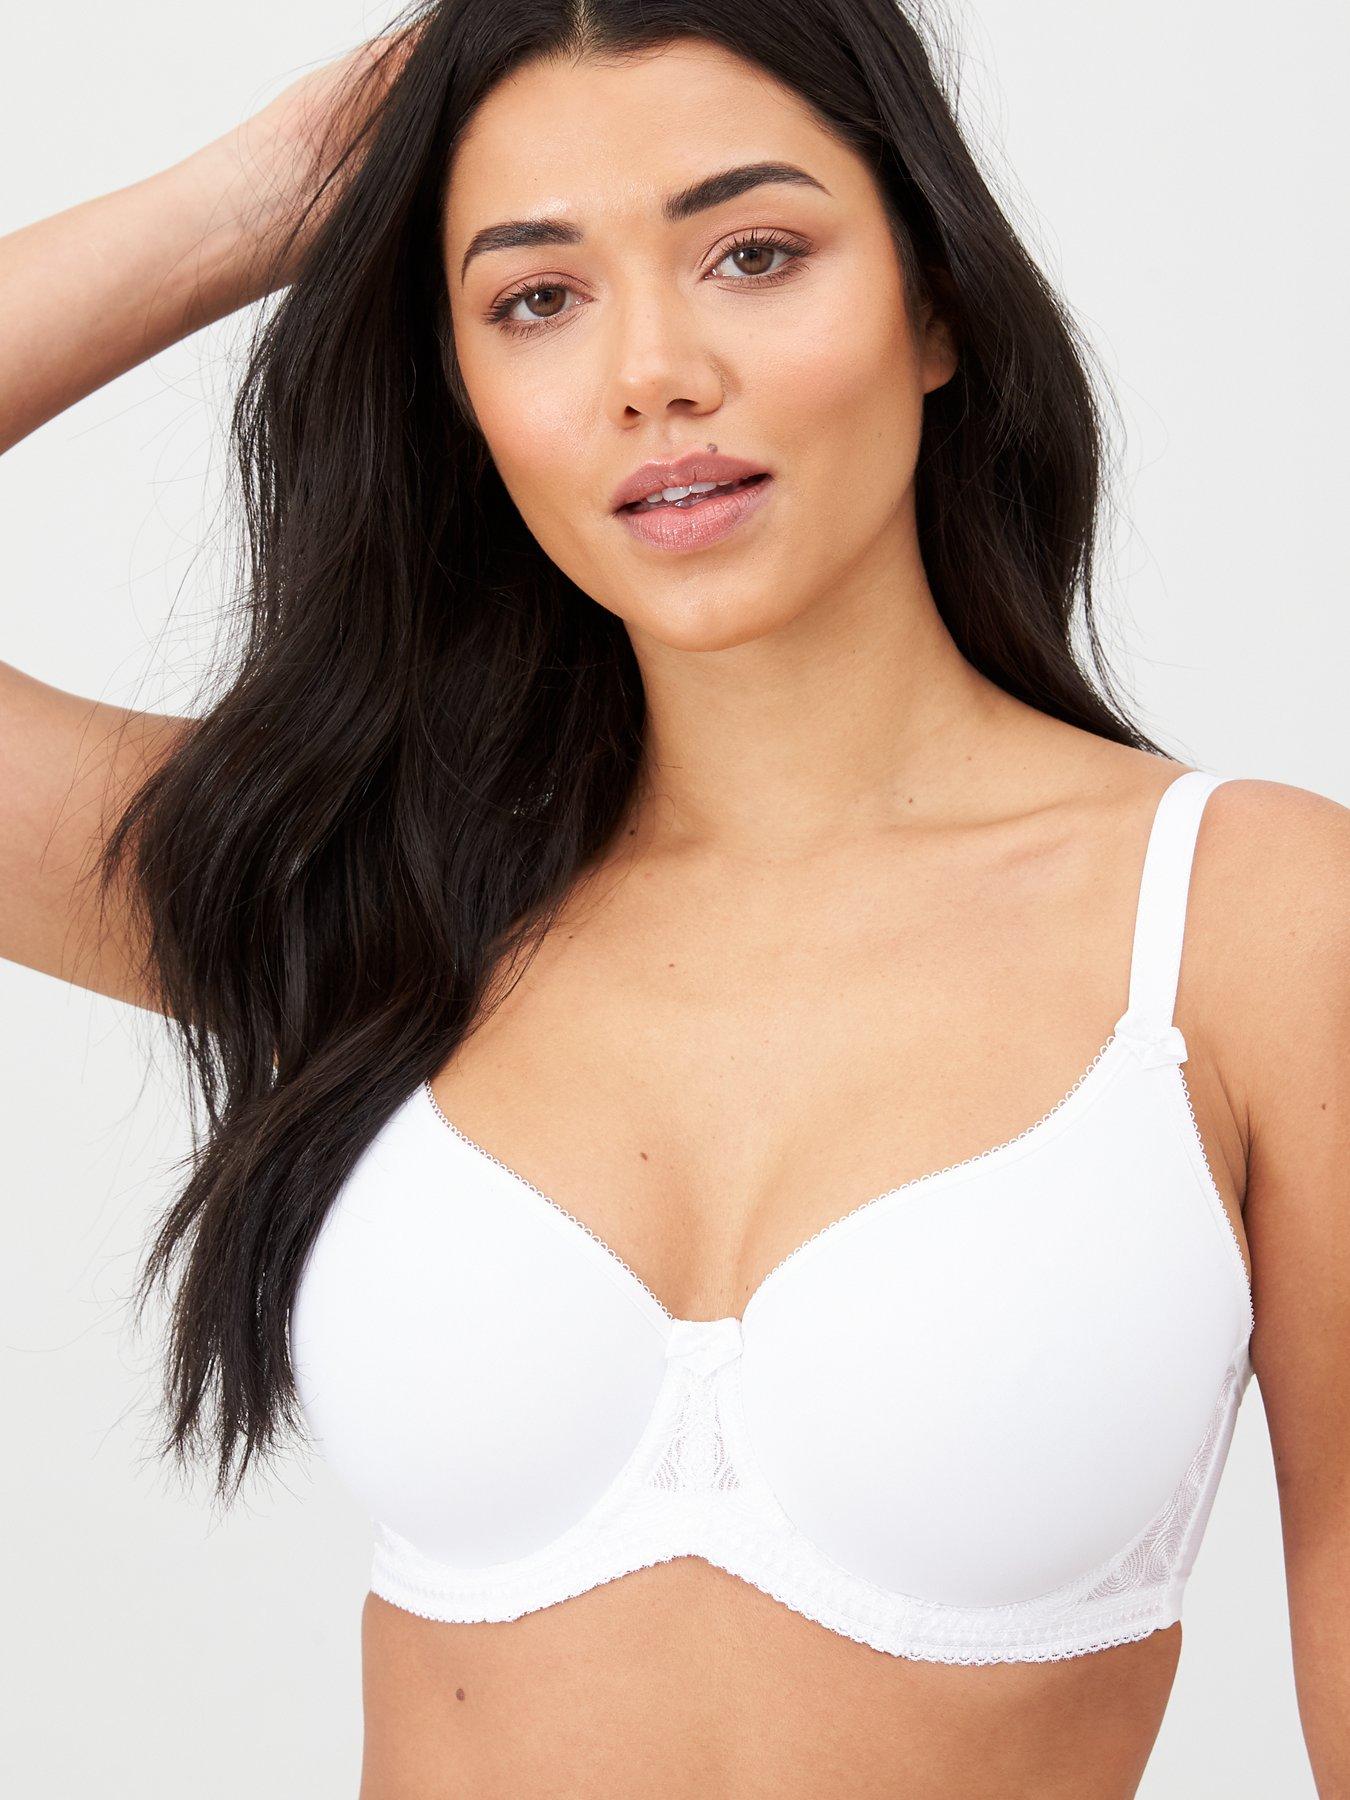 Panache Cari Moulded Spacer Underwired T-Shirt Bra - Caramel - Curvy